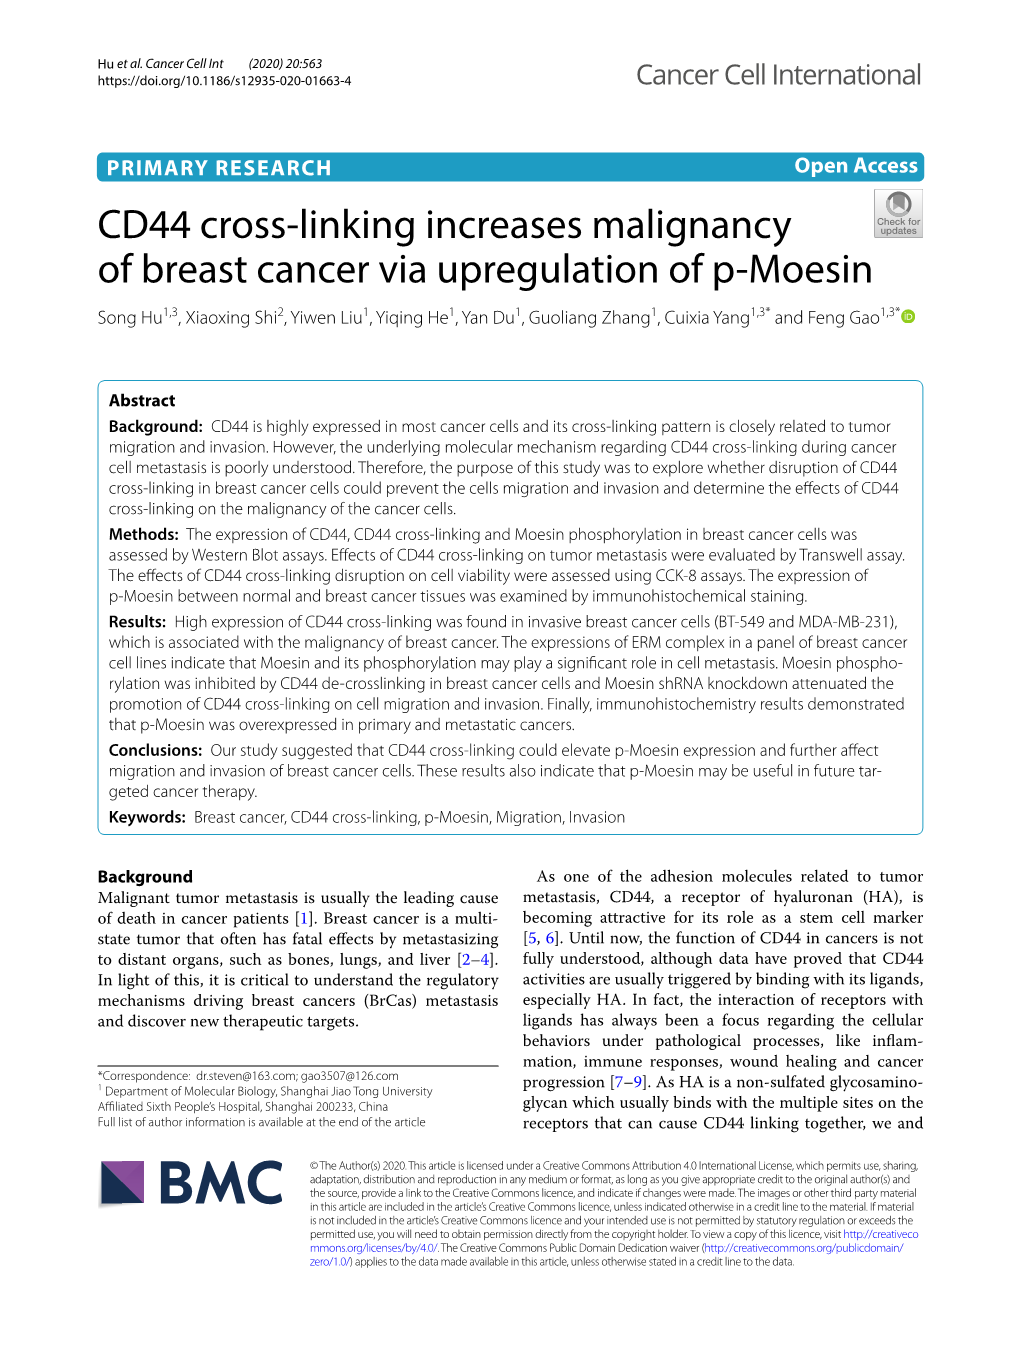 CD44 Cross-Linking Increases Malignancy of Breast Cancer Via